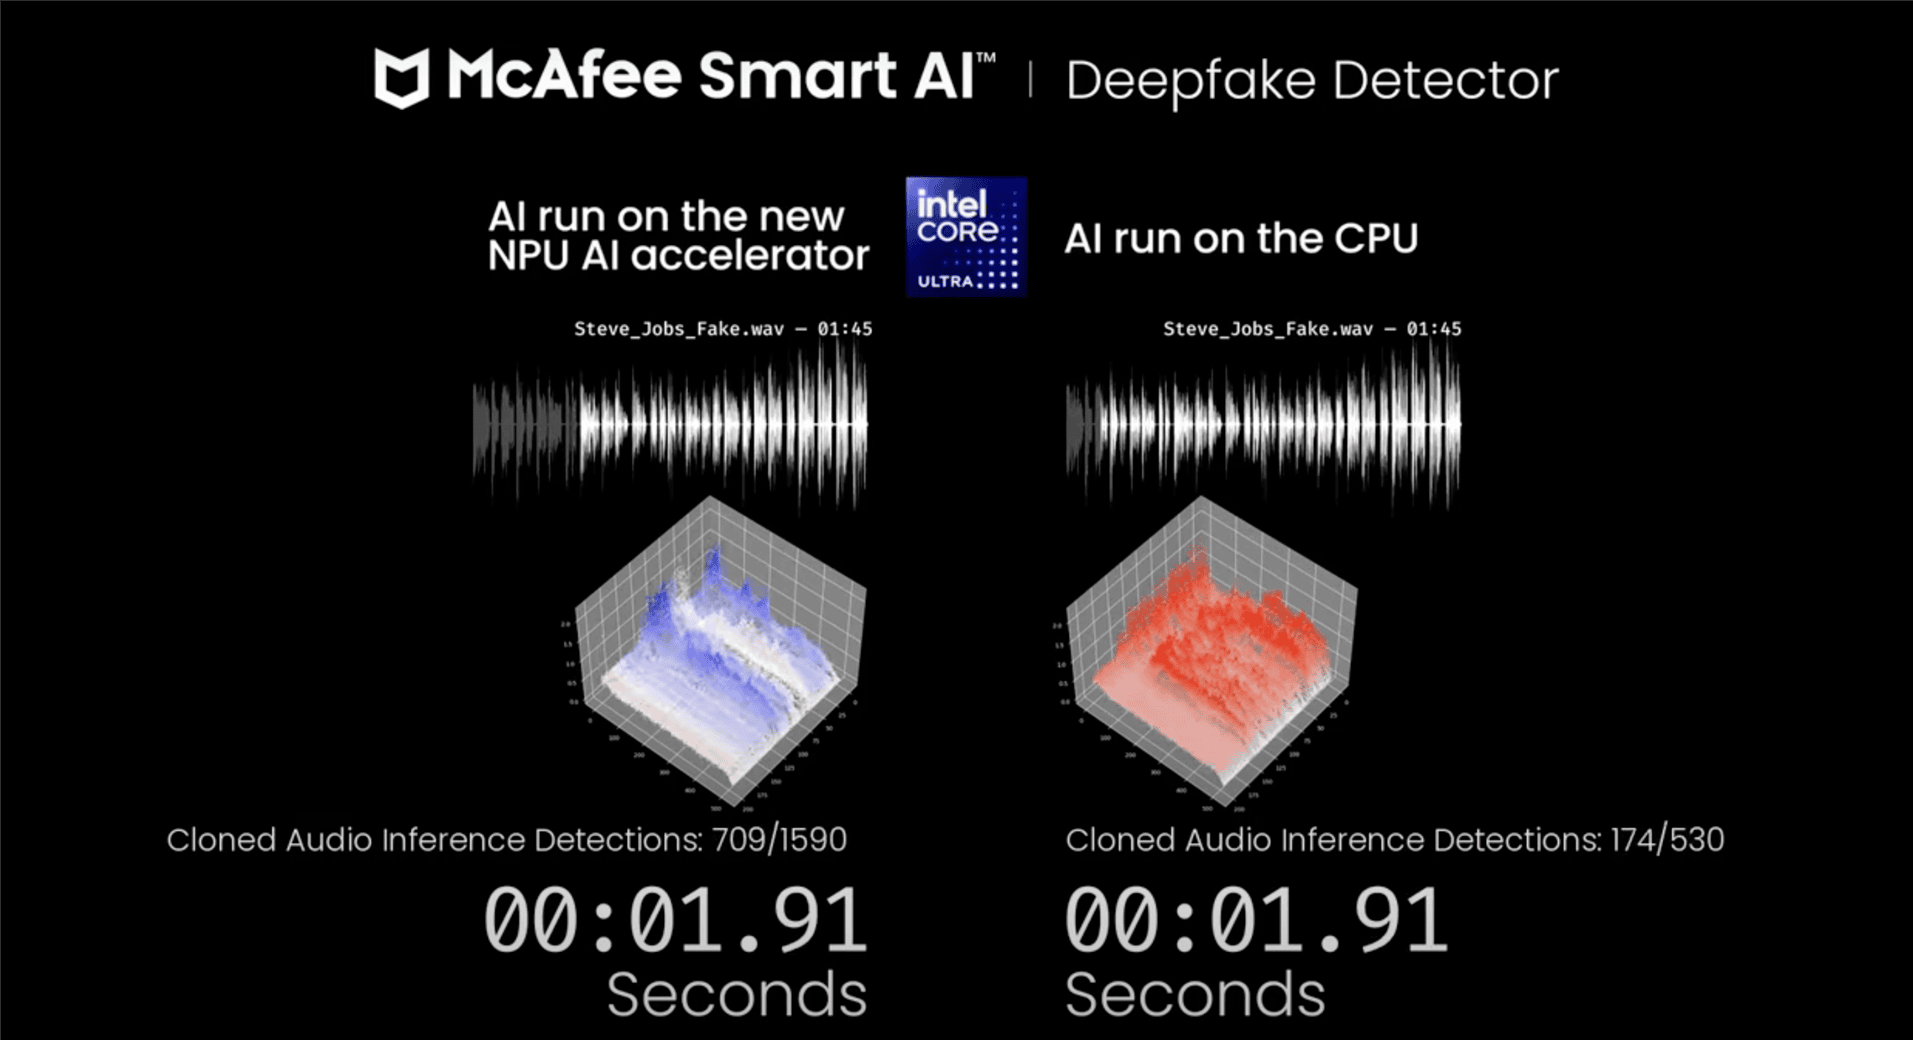 McAfee has enhanced its AI-powered deepfake detection technology by leveraging the power of the NPU in Intel Core Ultra processor-based PCs